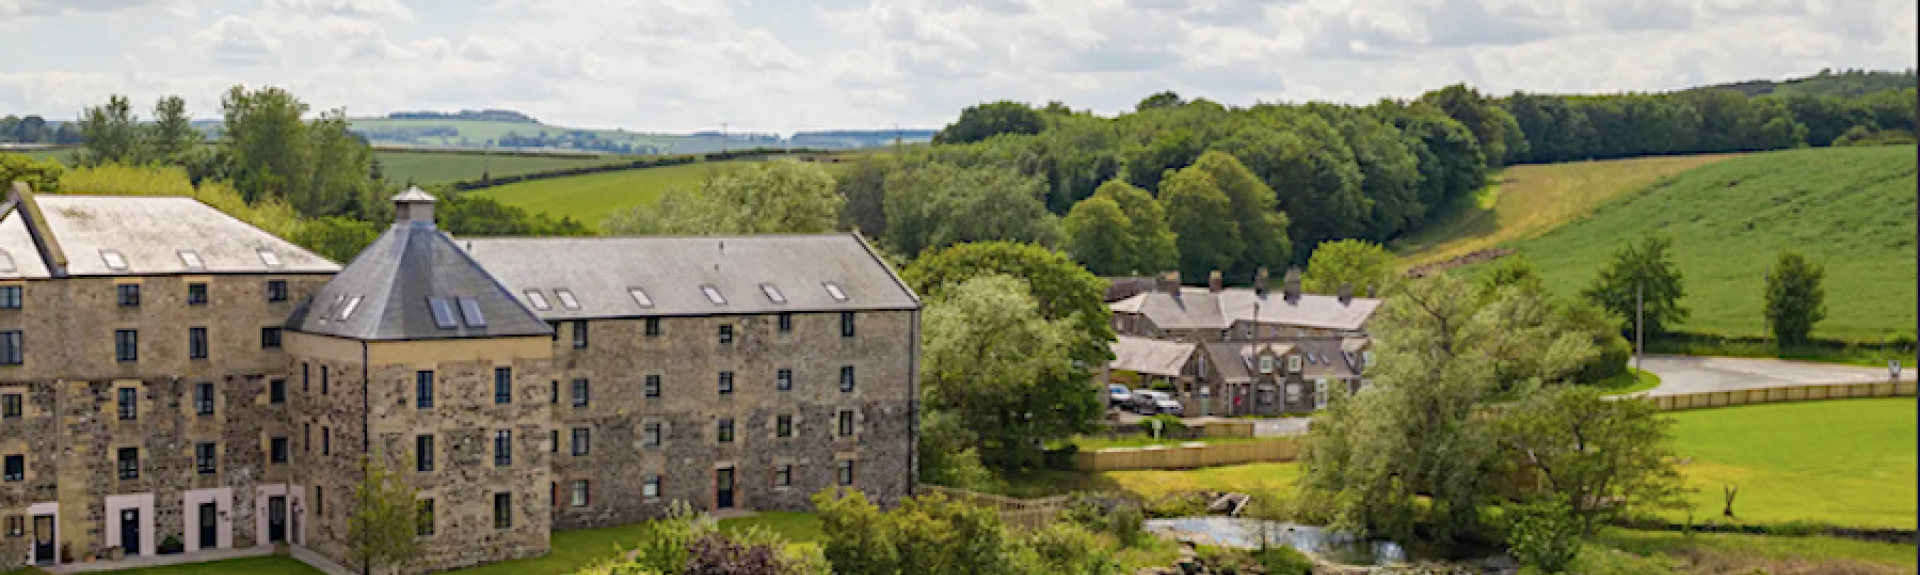 A converted 3-storey mill building overlooking lawns and a lake.